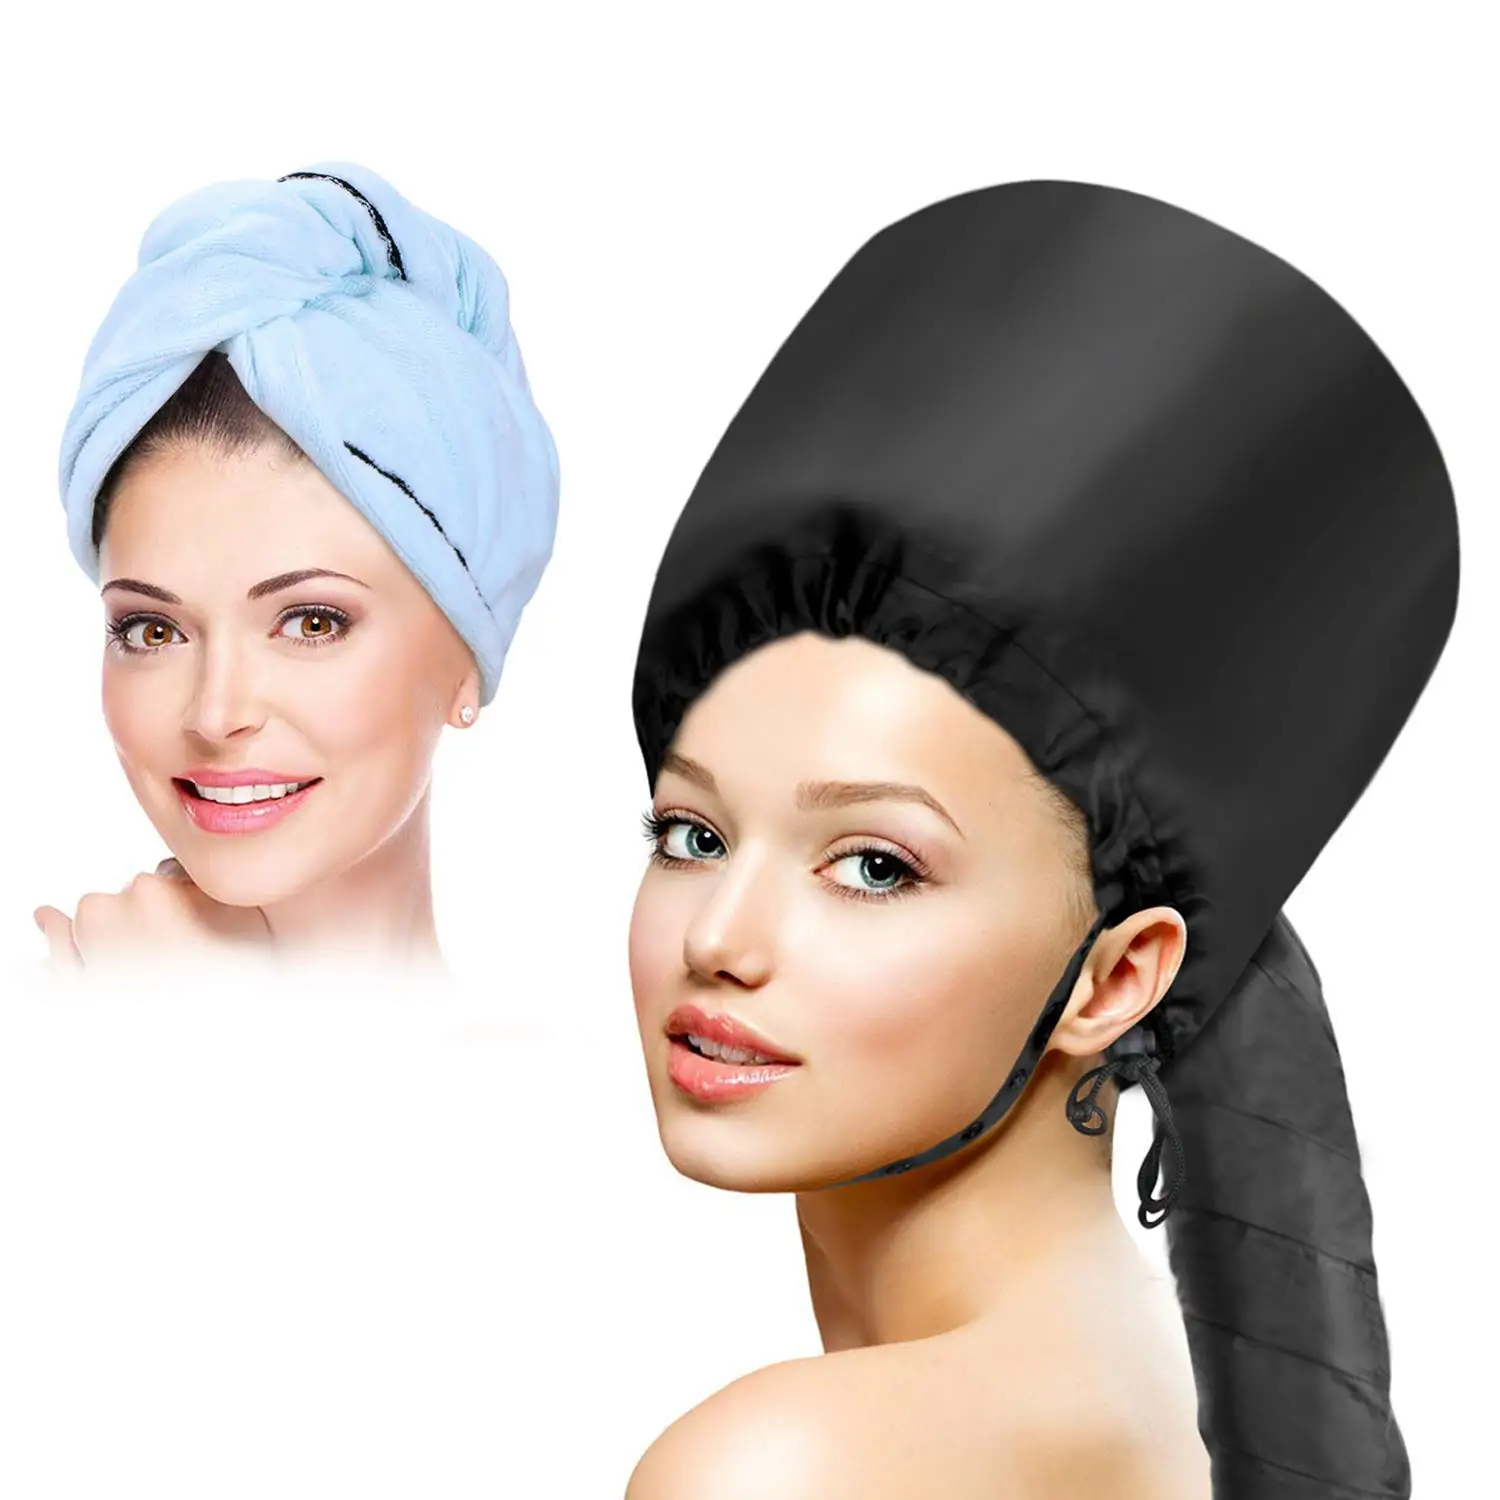 Bonnet Hood Hair Dryer Attachment- Hooded Hair Dryer Cap Hand Held Soft  Adjustable For Drying Curly Styling Deep Conditioning - Buy Bonnet Hood Hair  Dryer Attachment,Hooded Hair Dryer Cap Hand Held Soft